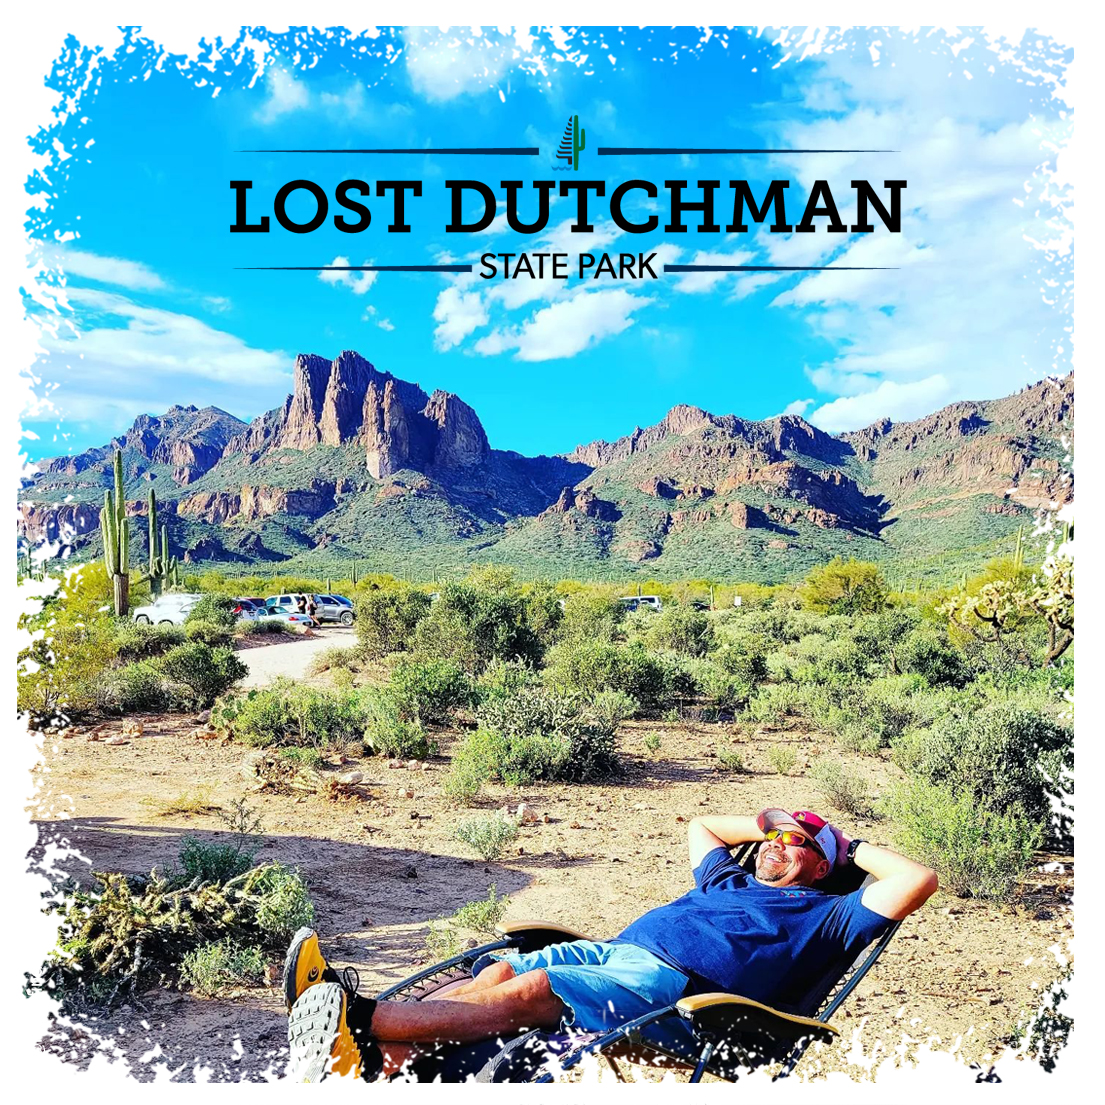 Lounging in the sun at the Lost Dutchman State Park campground